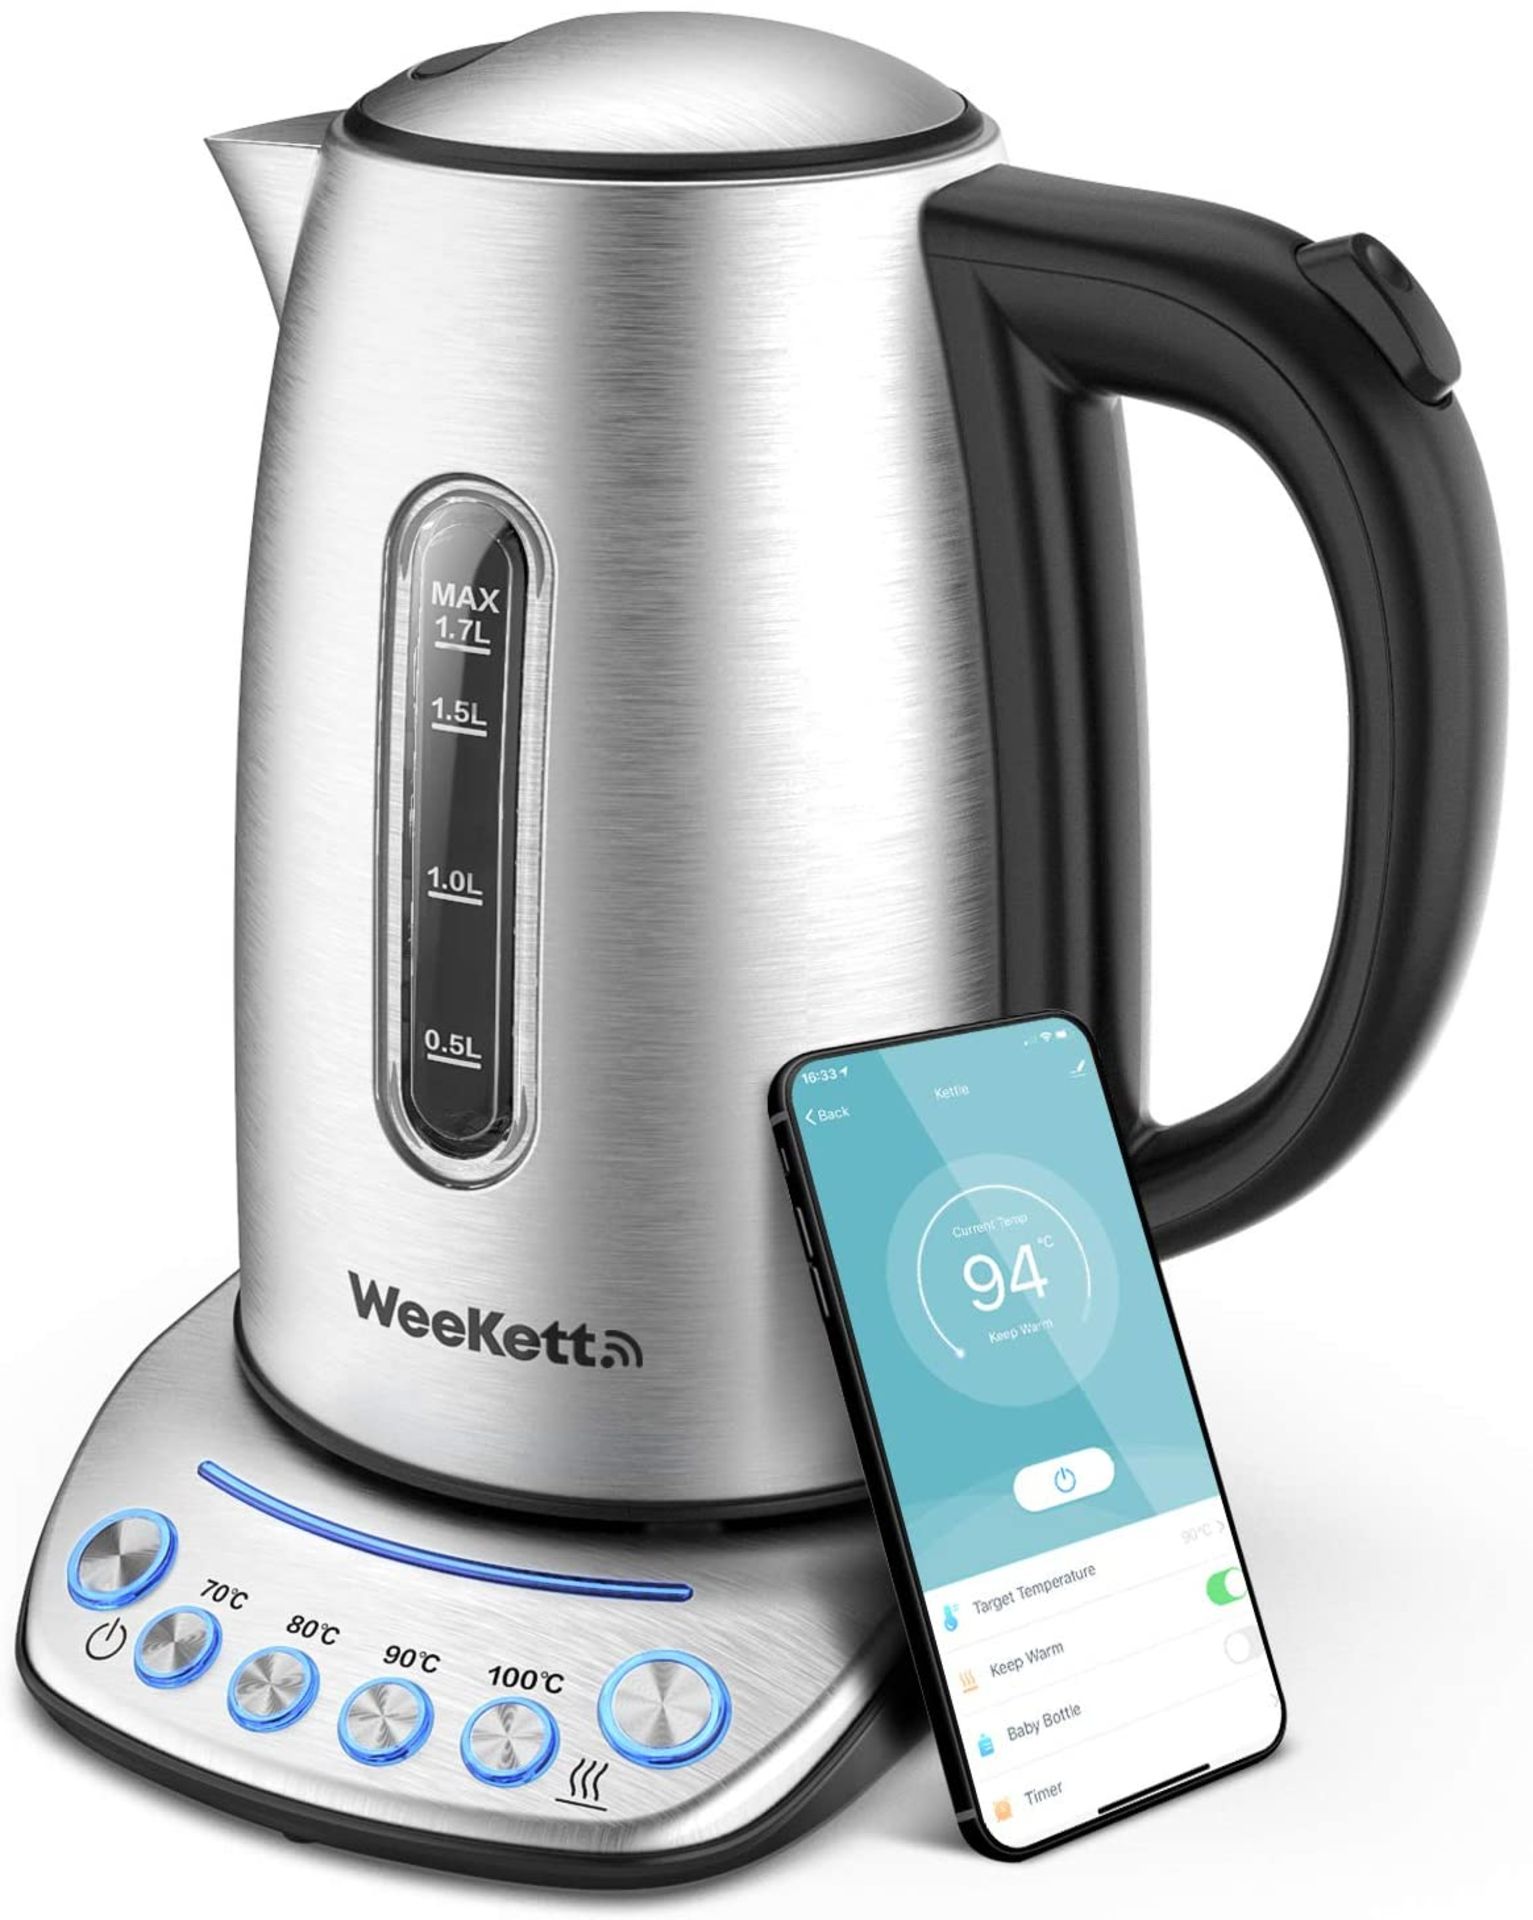 WEEKETT SMART WIFI KETTLE RRP £79.99Condition ReportAppraisal Available on Request - All Items are